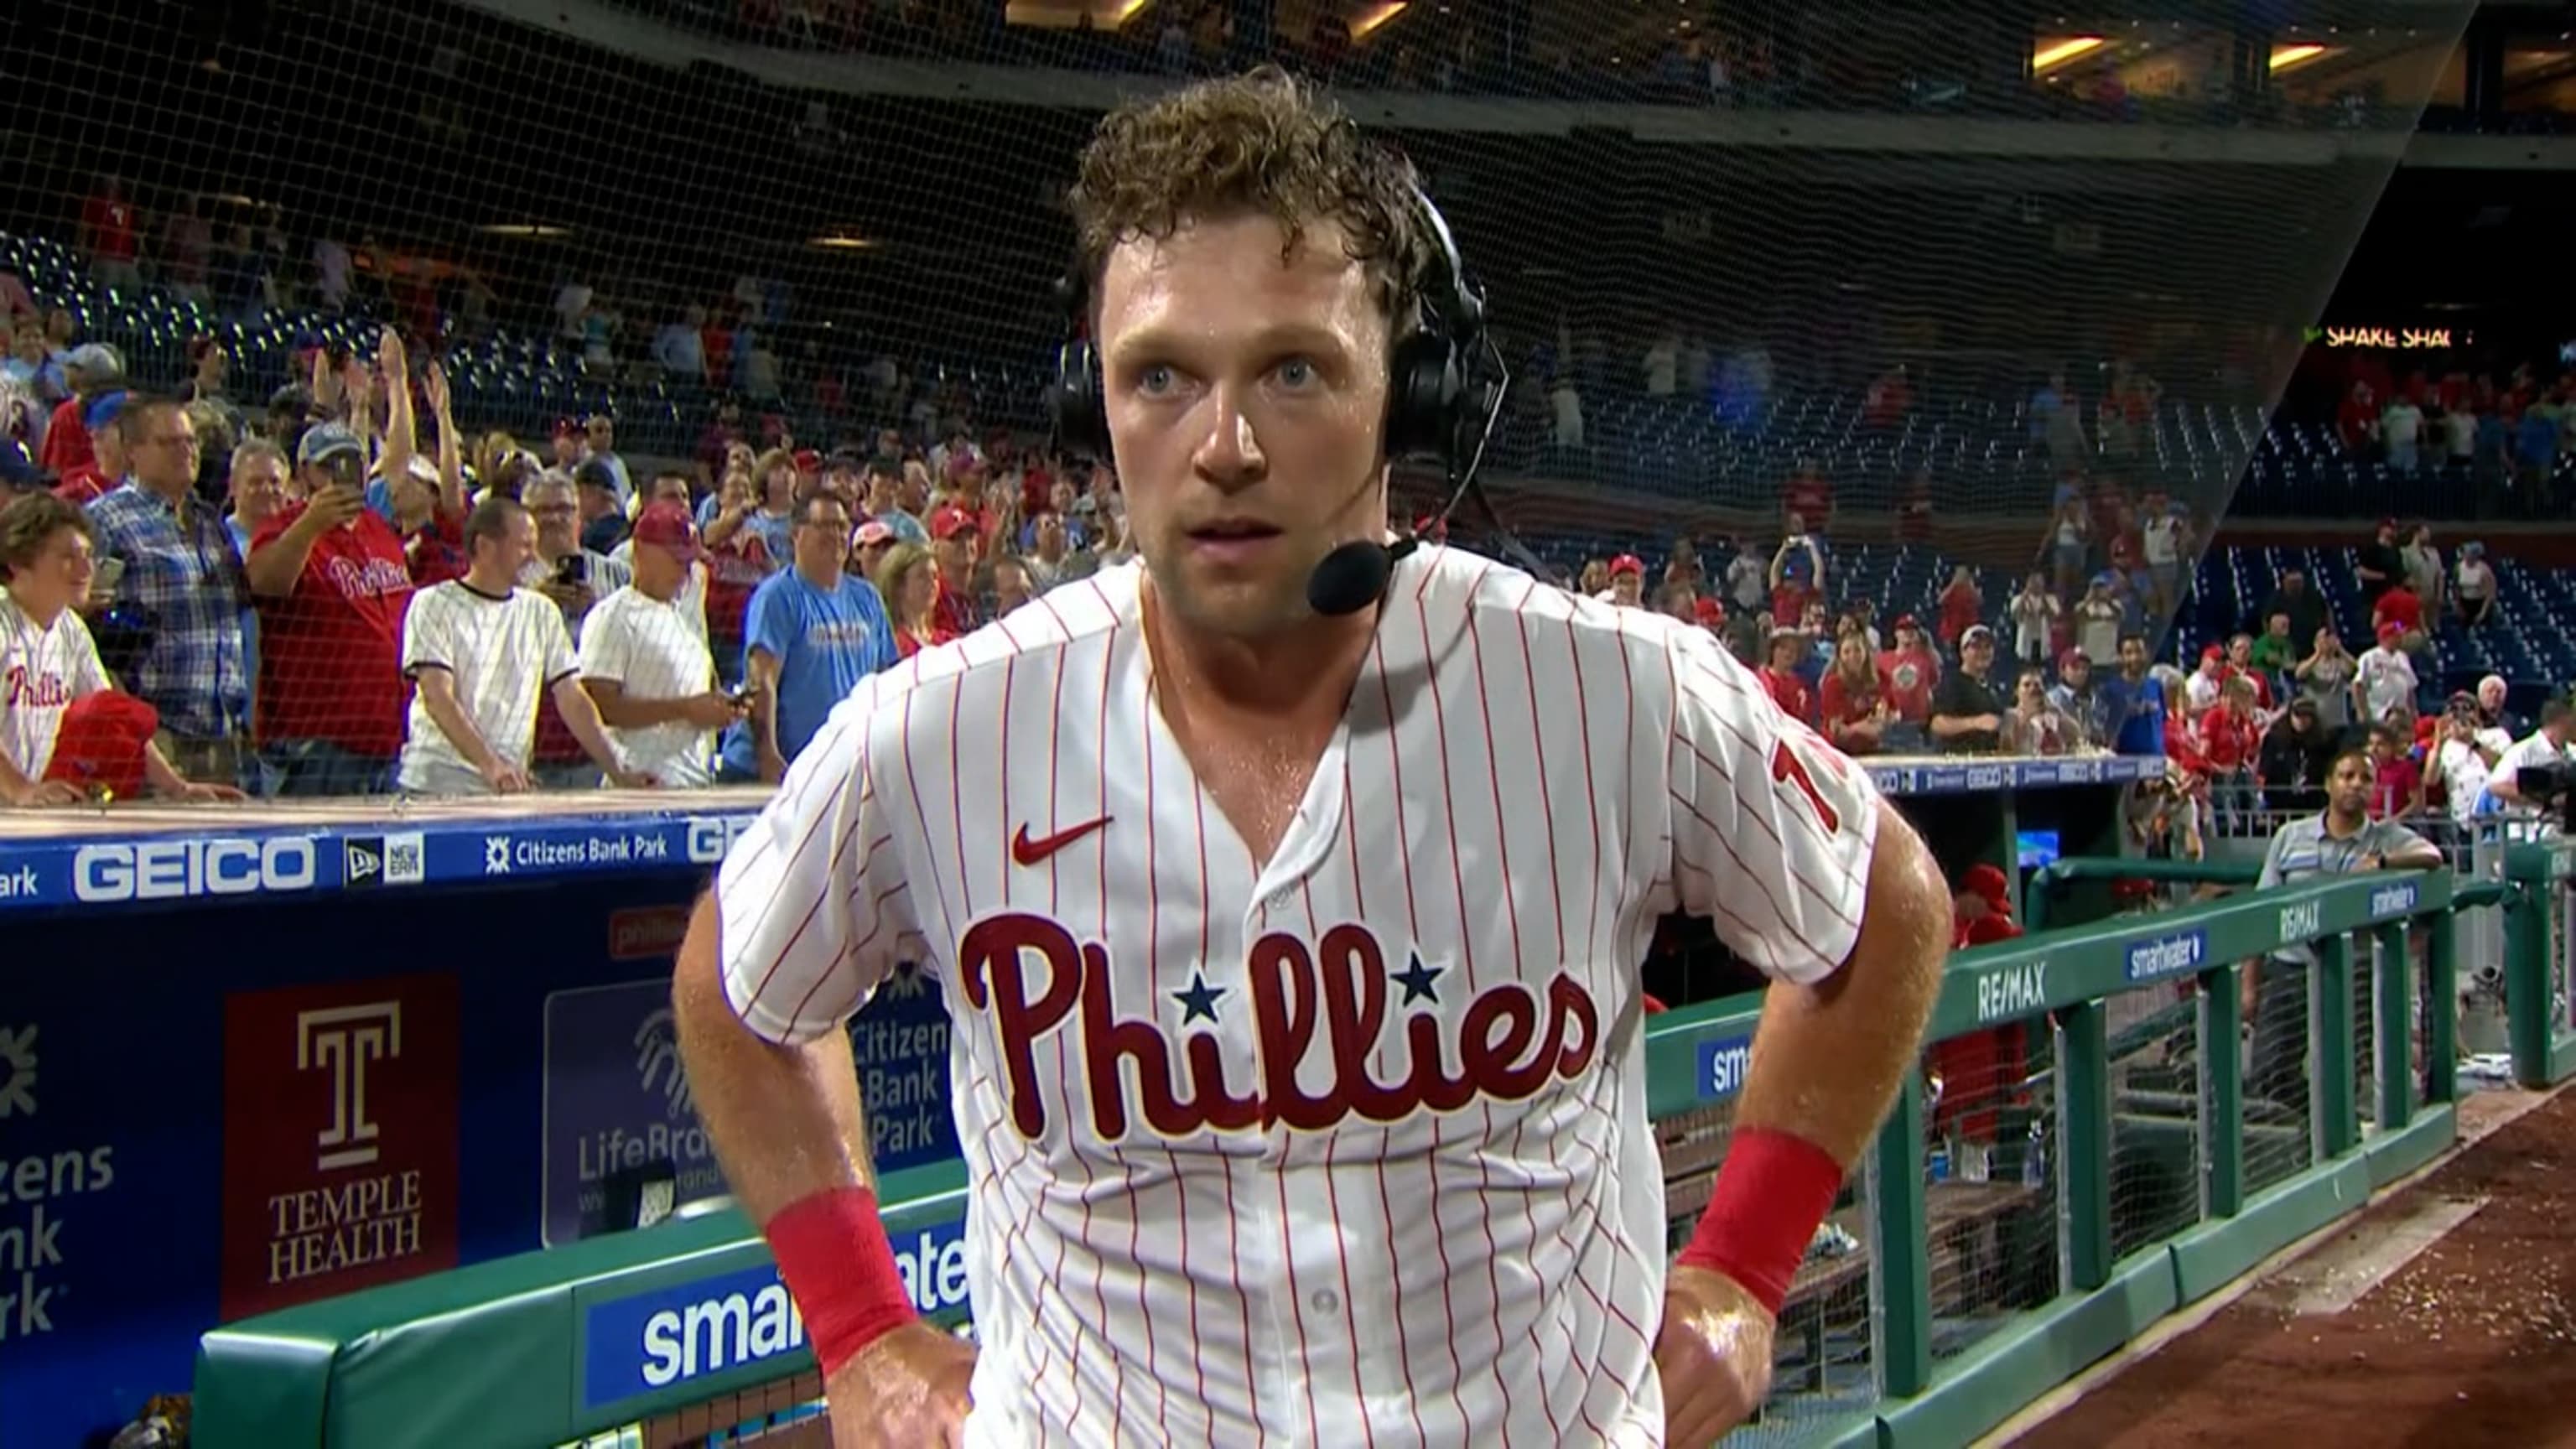 Phillies rally in 9th, beat D-backs in 10th on walk-off single